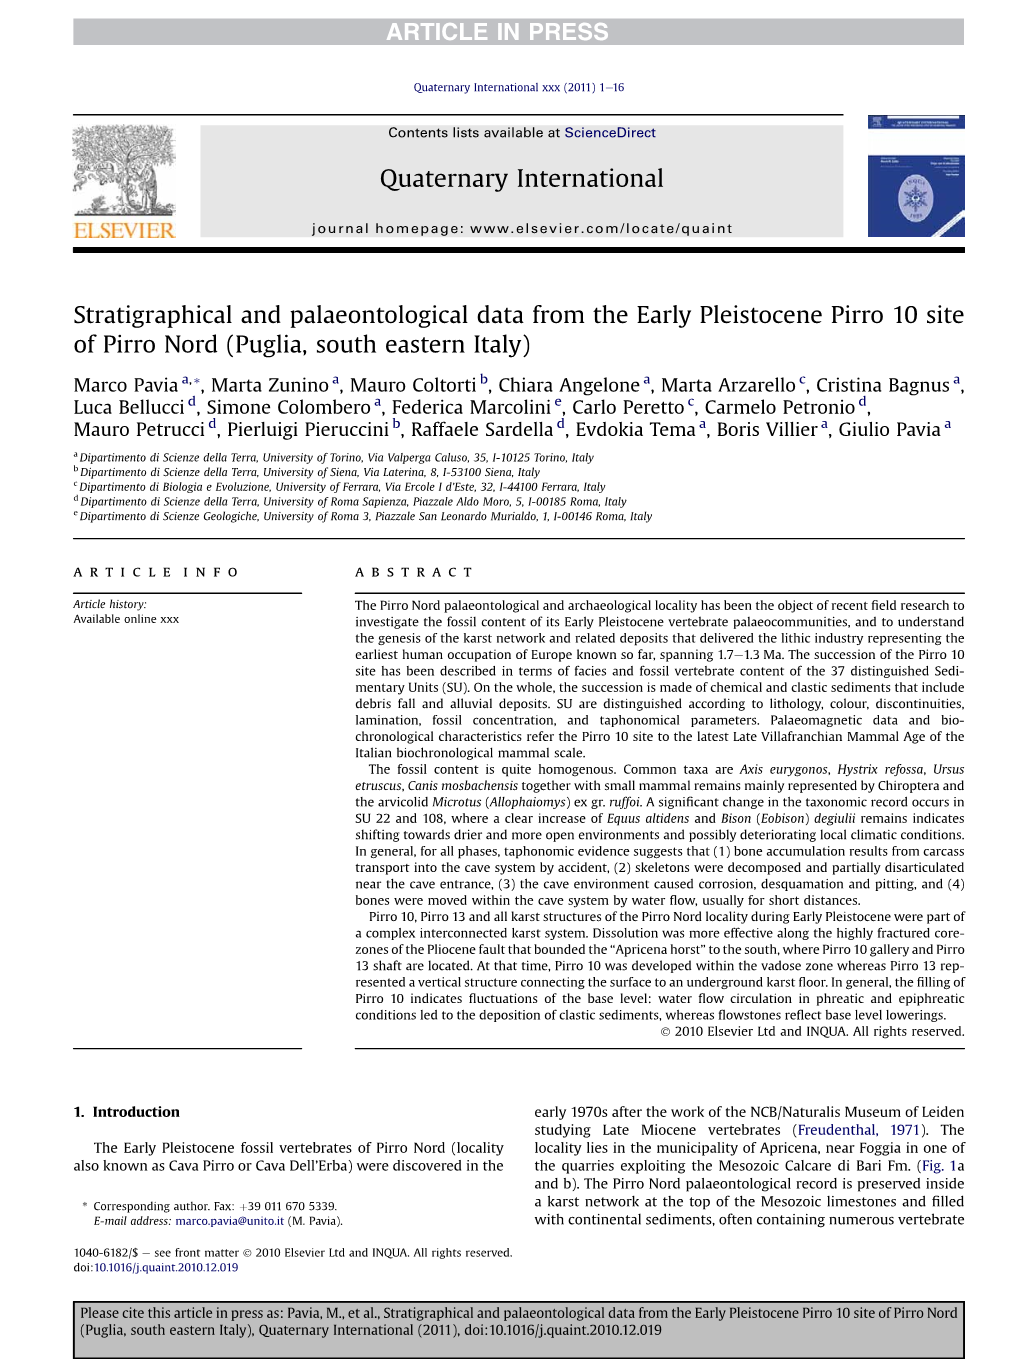 Stratigraphical and Palaeontological Data from the Early Pleistocene Pirro 10 Site of Pirro Nord (Puglia, South Eastern Italy)